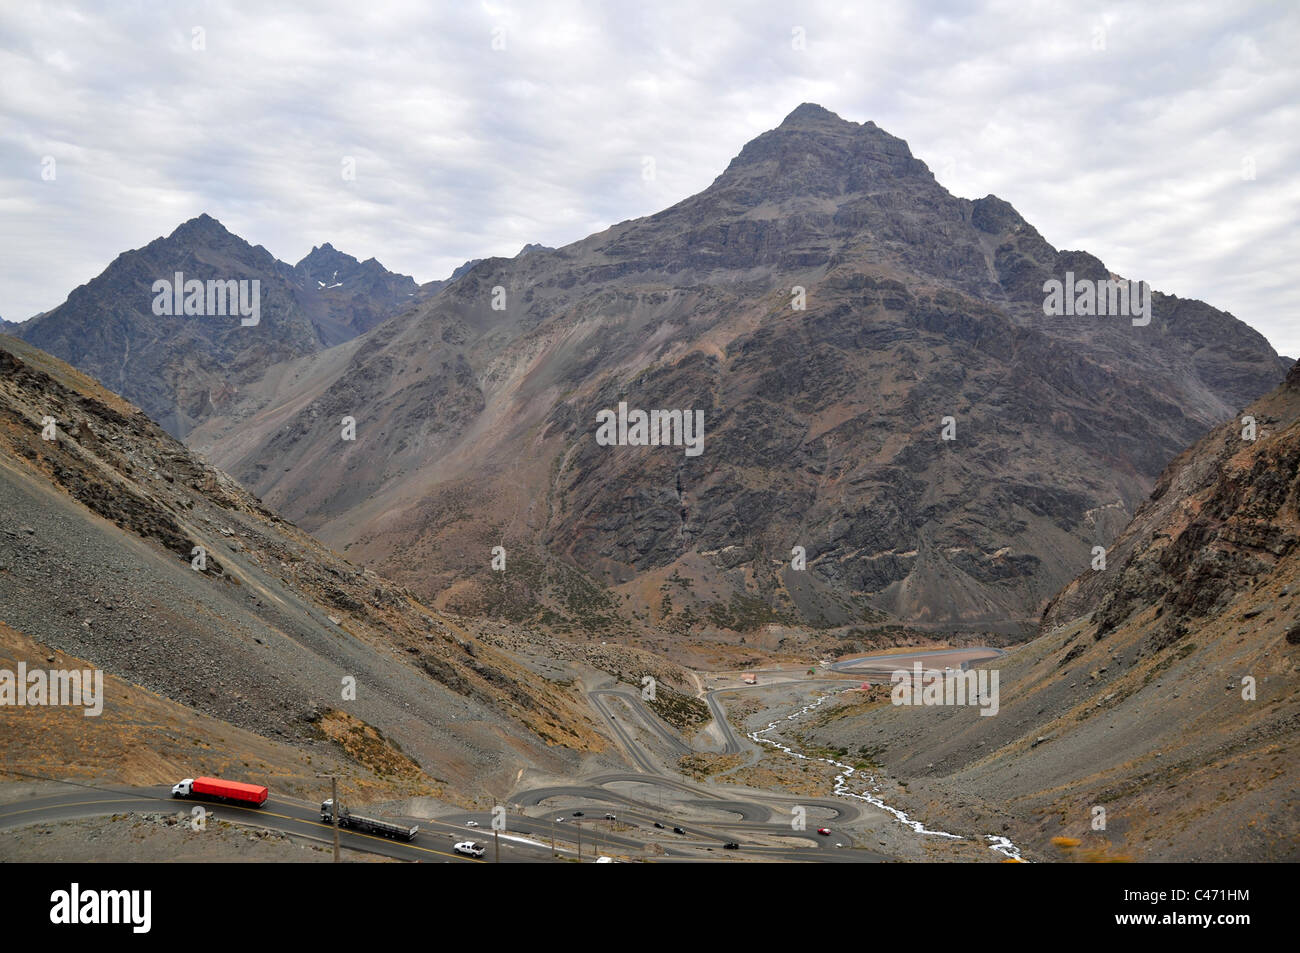 Two lorries at the top of hairpin bends descending into the Aconcagua River Valley, Ruta 7, summit Uspallata Pass, Andes, Chile Stock Photo